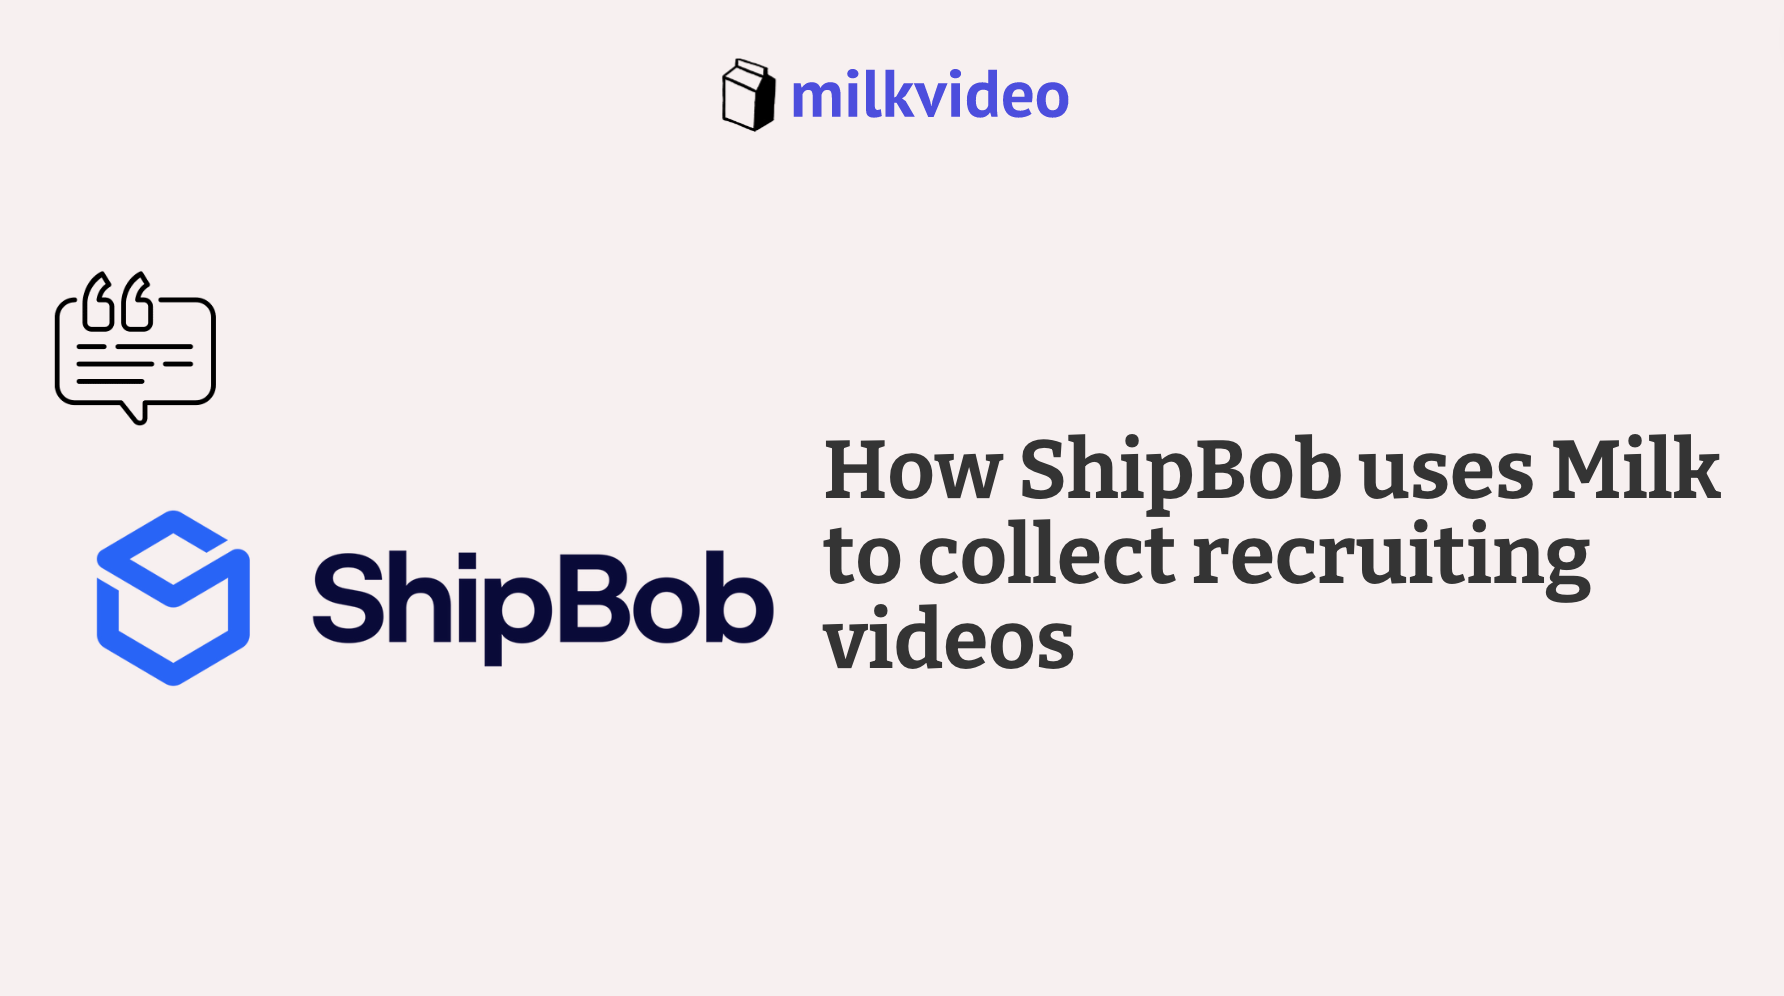 How ShipBob uses Milk to collect recruiting videos